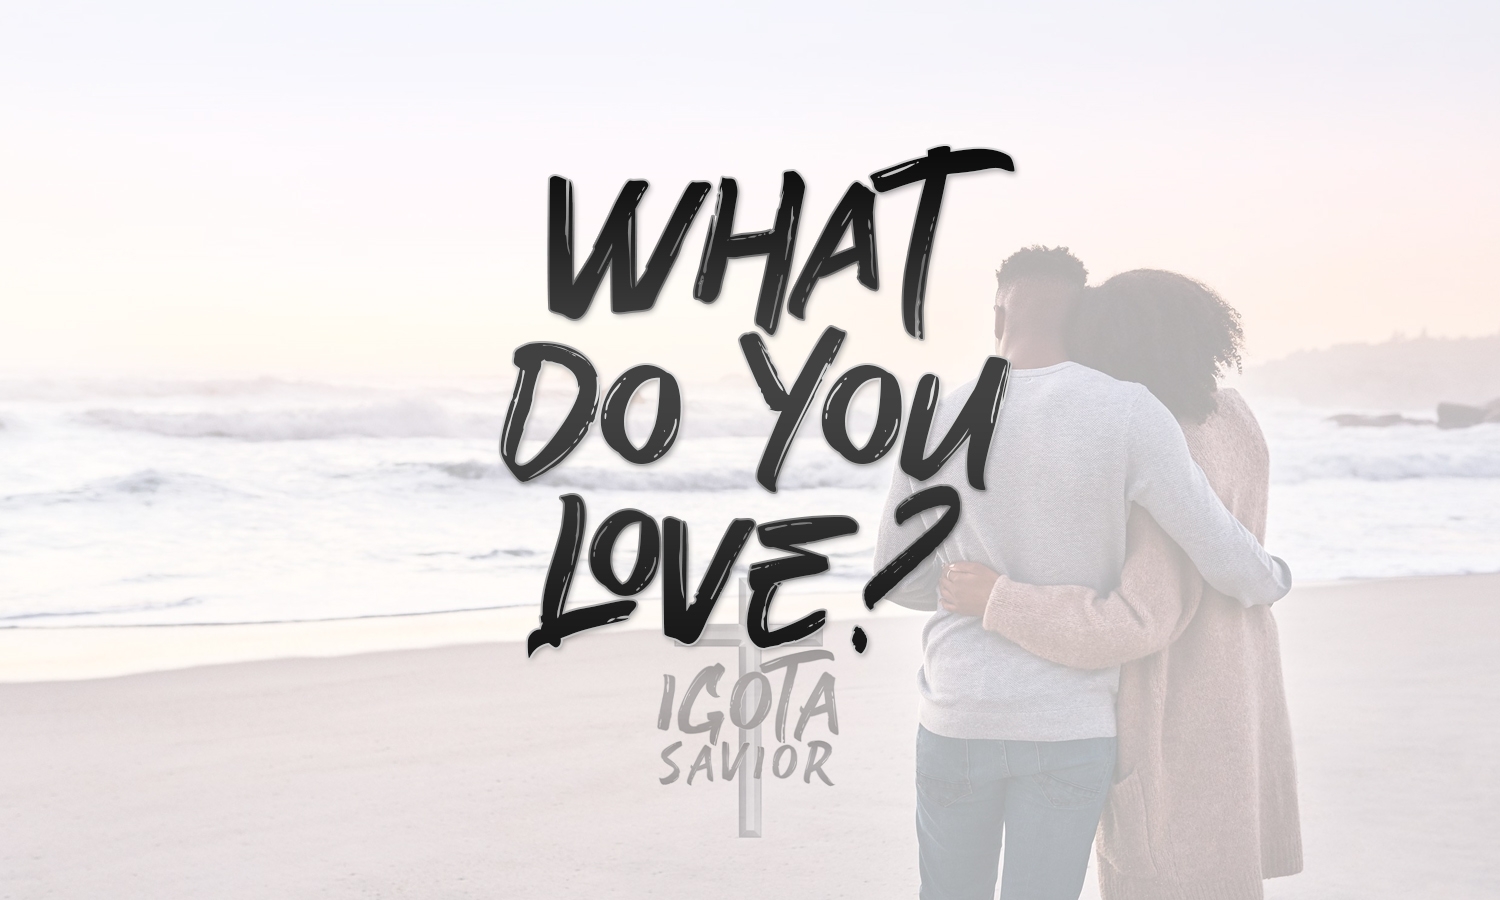 What Do You Love?